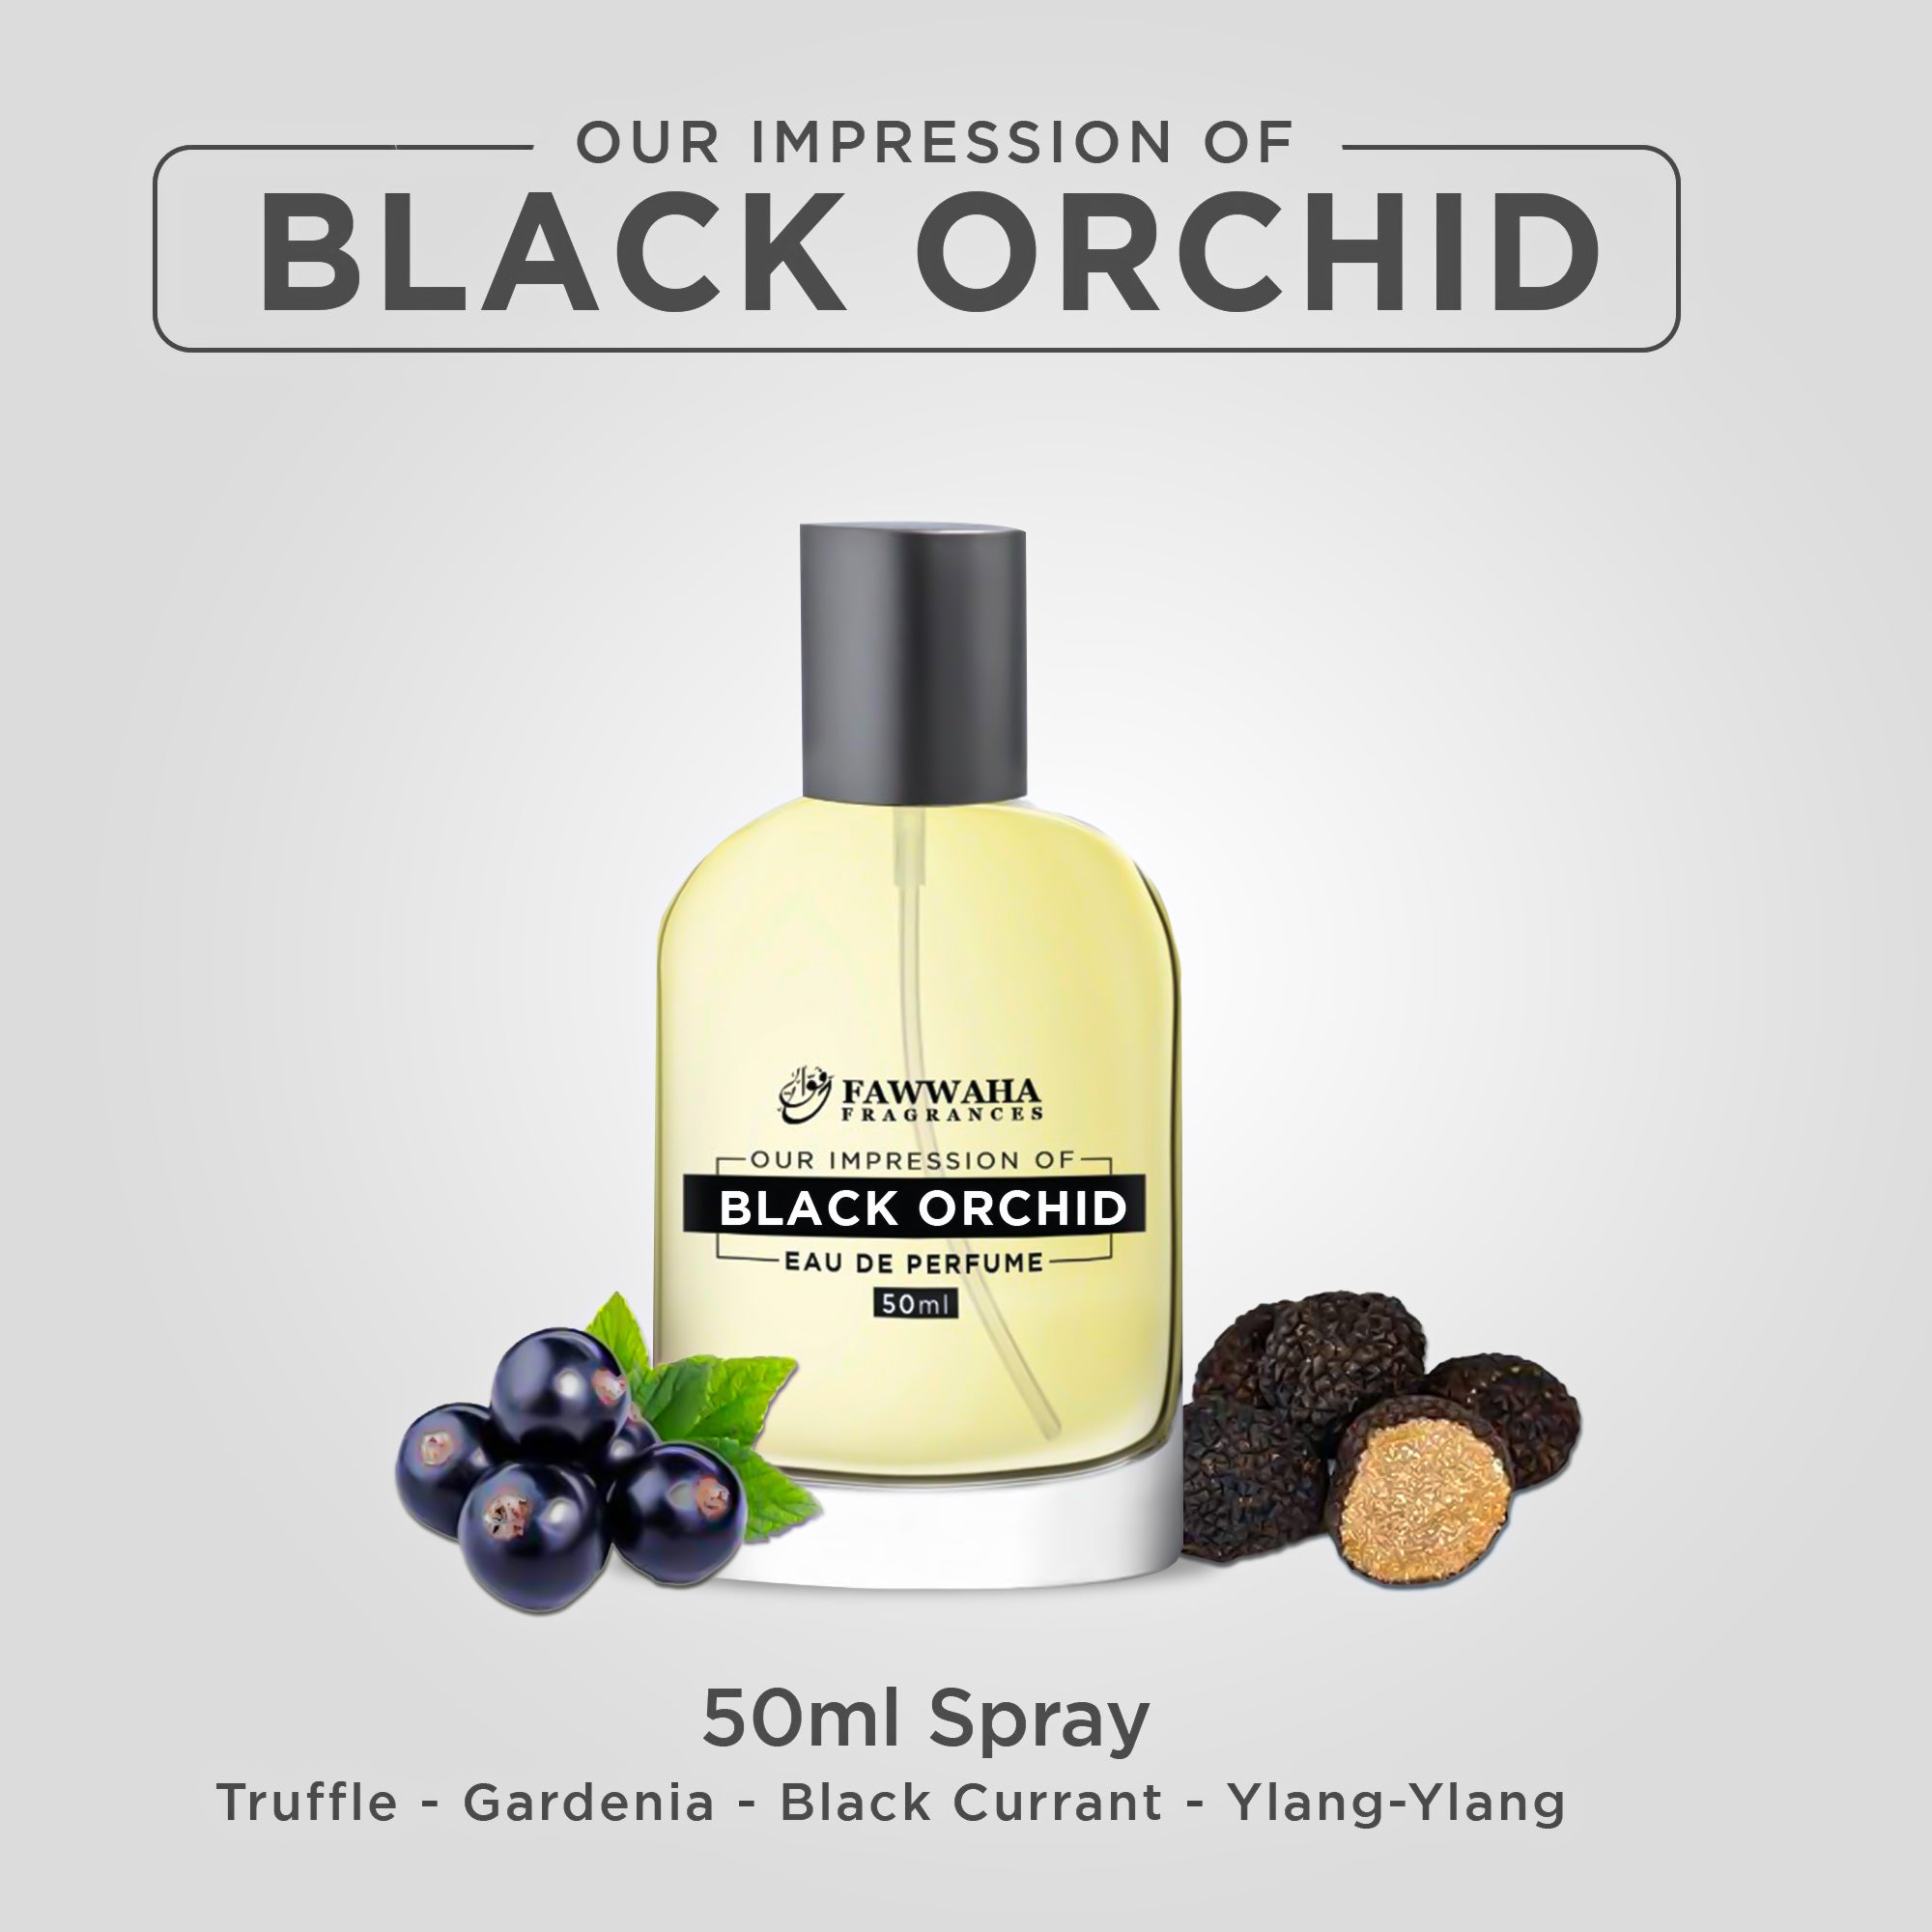 OUR IMPRESSION OF BLACK ORCHID